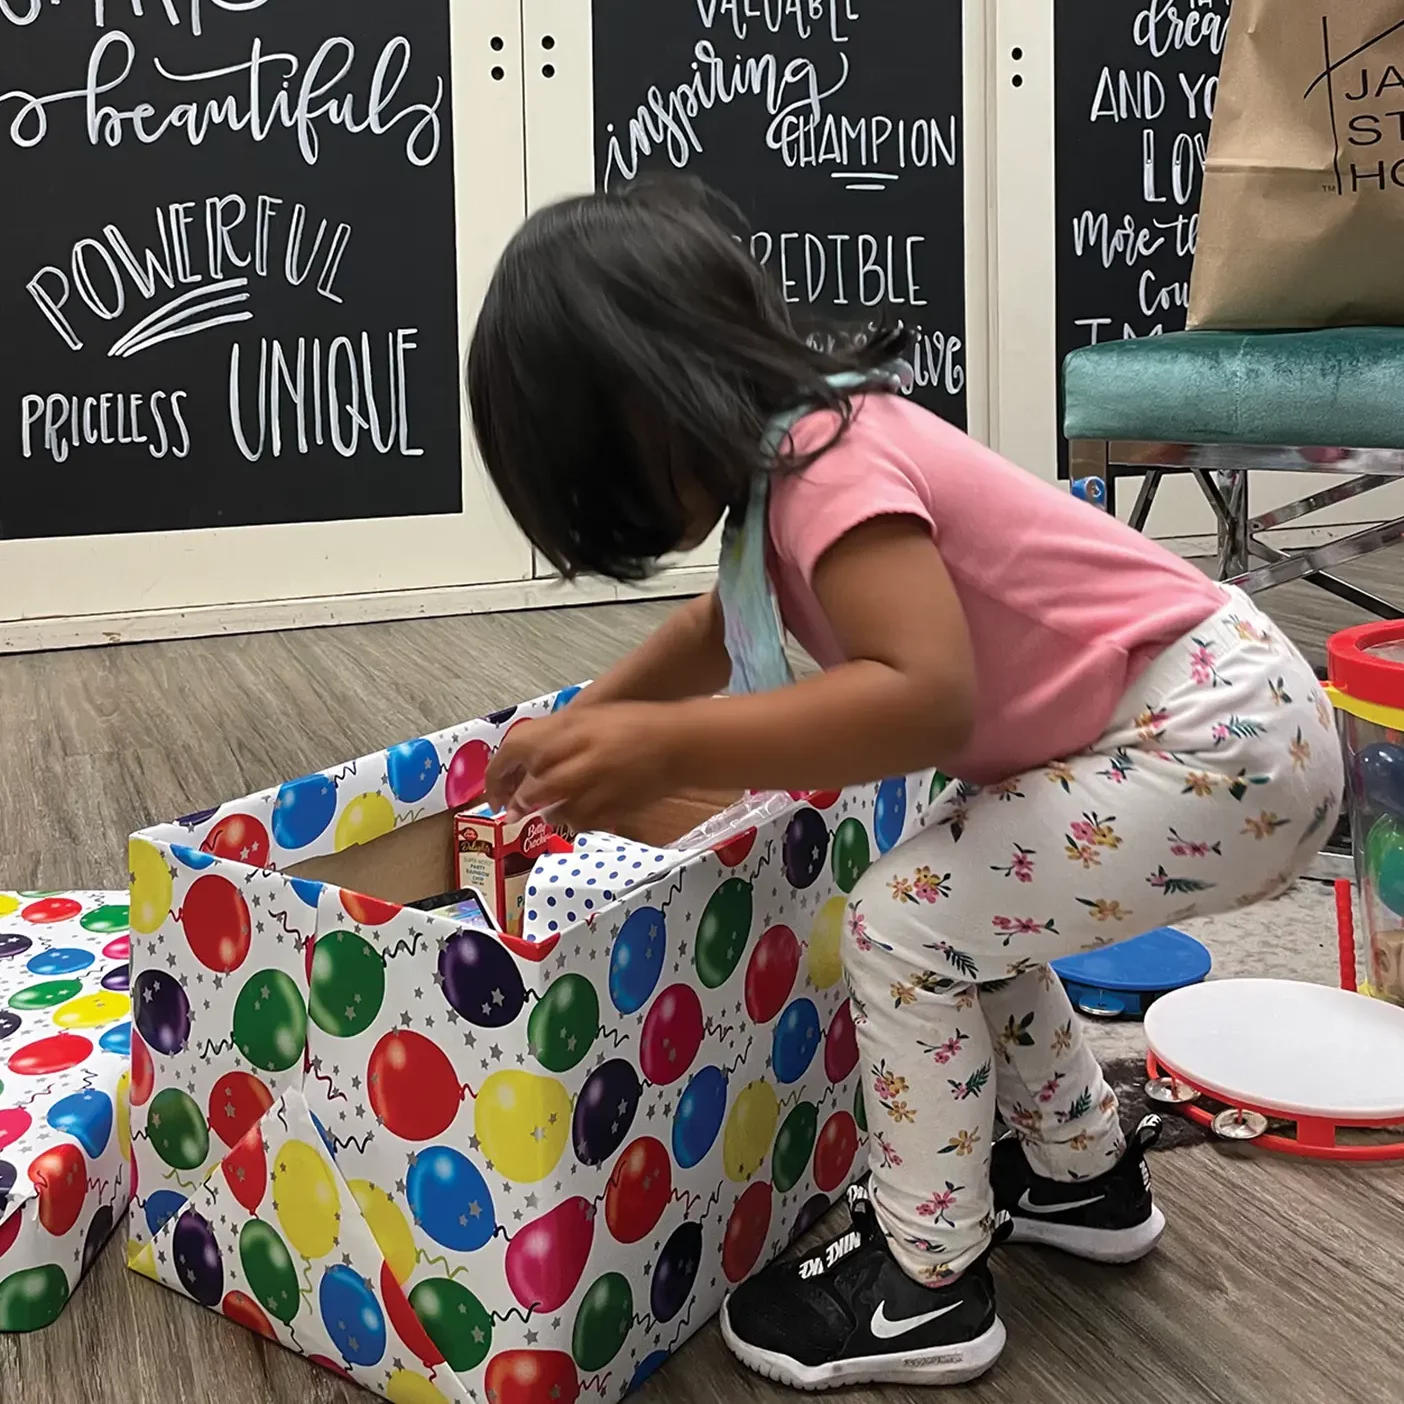 A child reaches into a box decorated with birthday balloons.